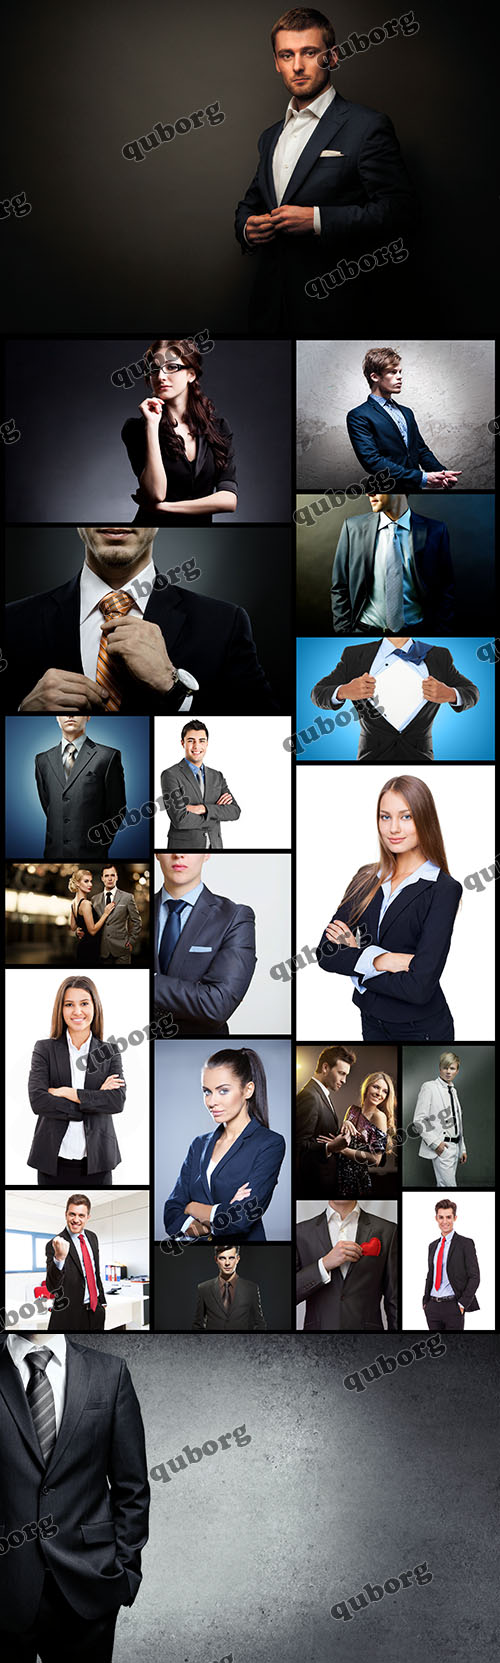 Stock Photos - Classical Suits